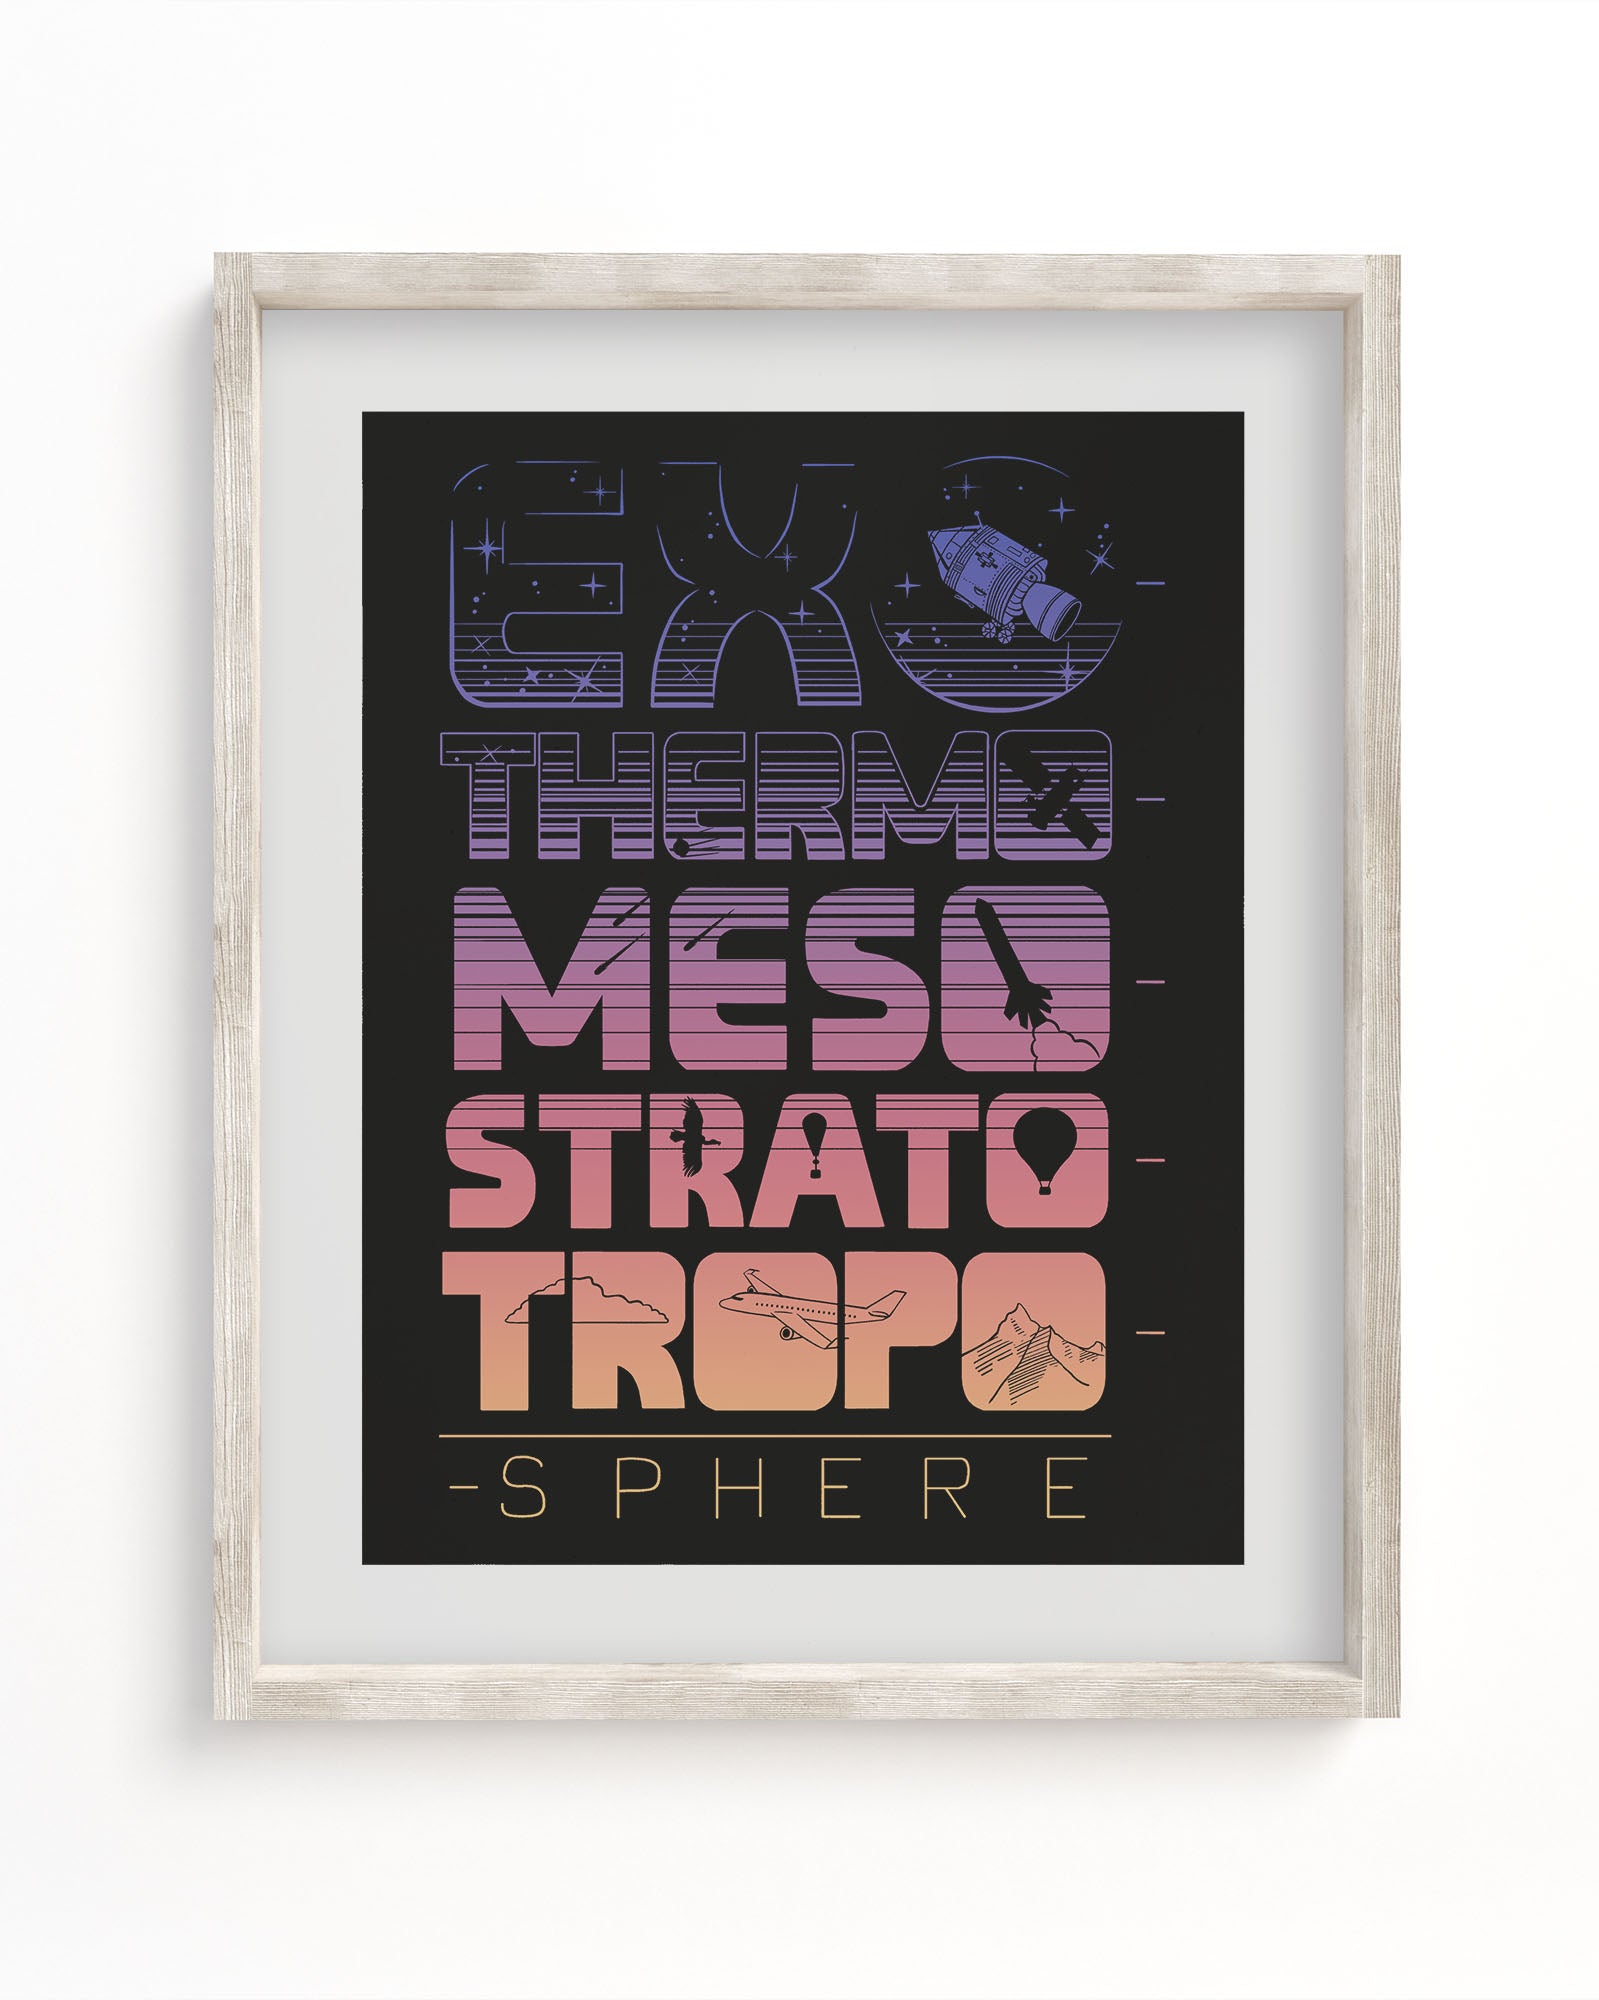 A Cognitive Surplus framed poster with the words "ex strato sphere" featuring the Above the Earth Museum Print.